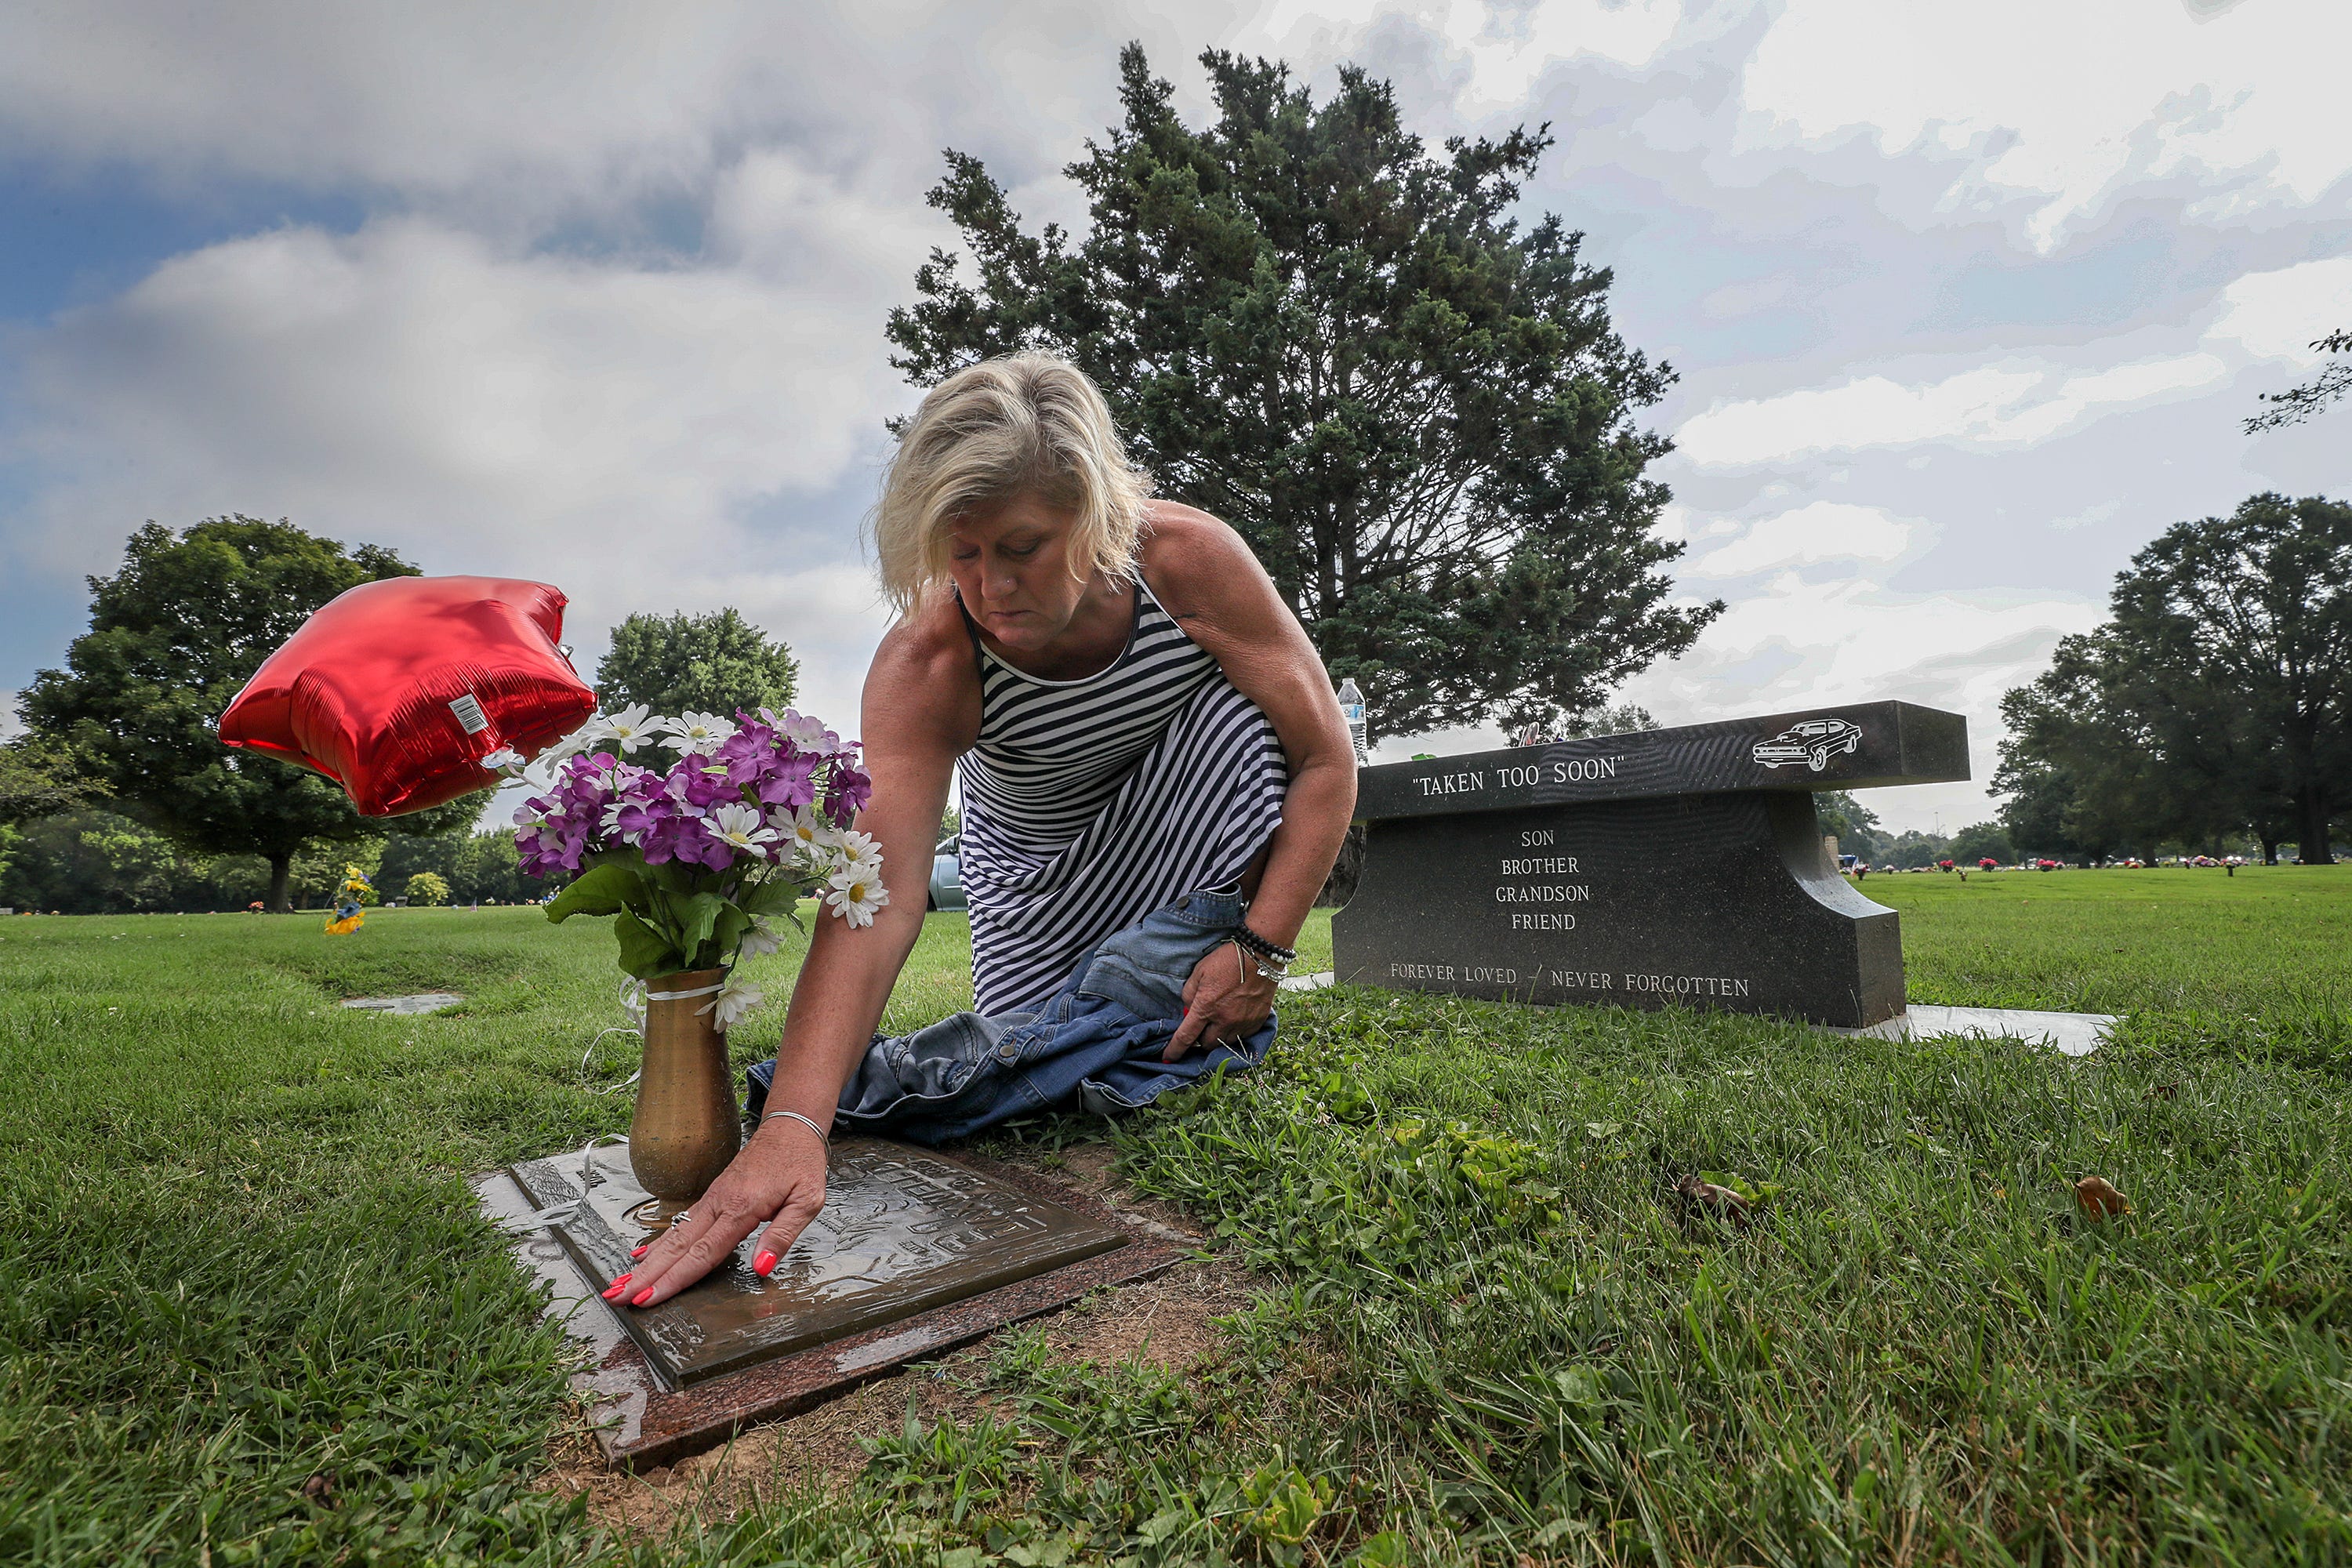 Michele Crockett, mother of Max Gilpin, uses some water and a shirt to wipe off her son's grave on what would have been Gilpin's 26th birthday. He died after becoming overheated at football practice at Pleasure Ridge Park High School. July 19, 2019